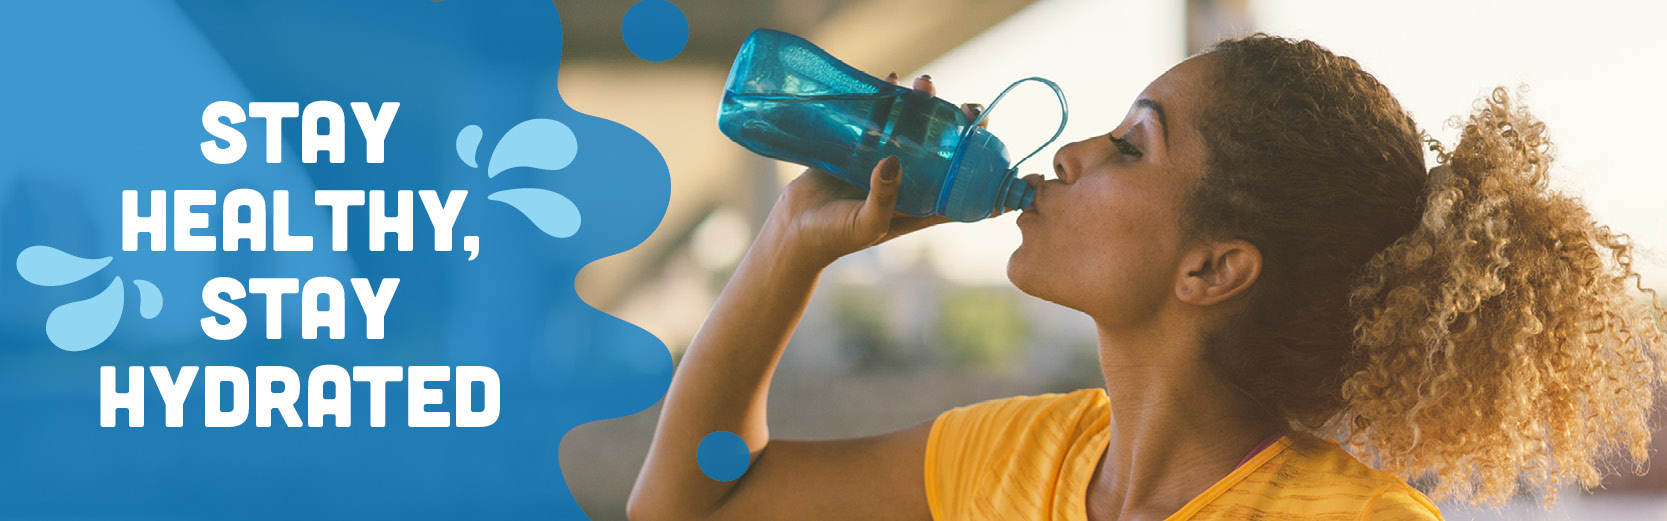 Hydration for staying hydrated in hot weather